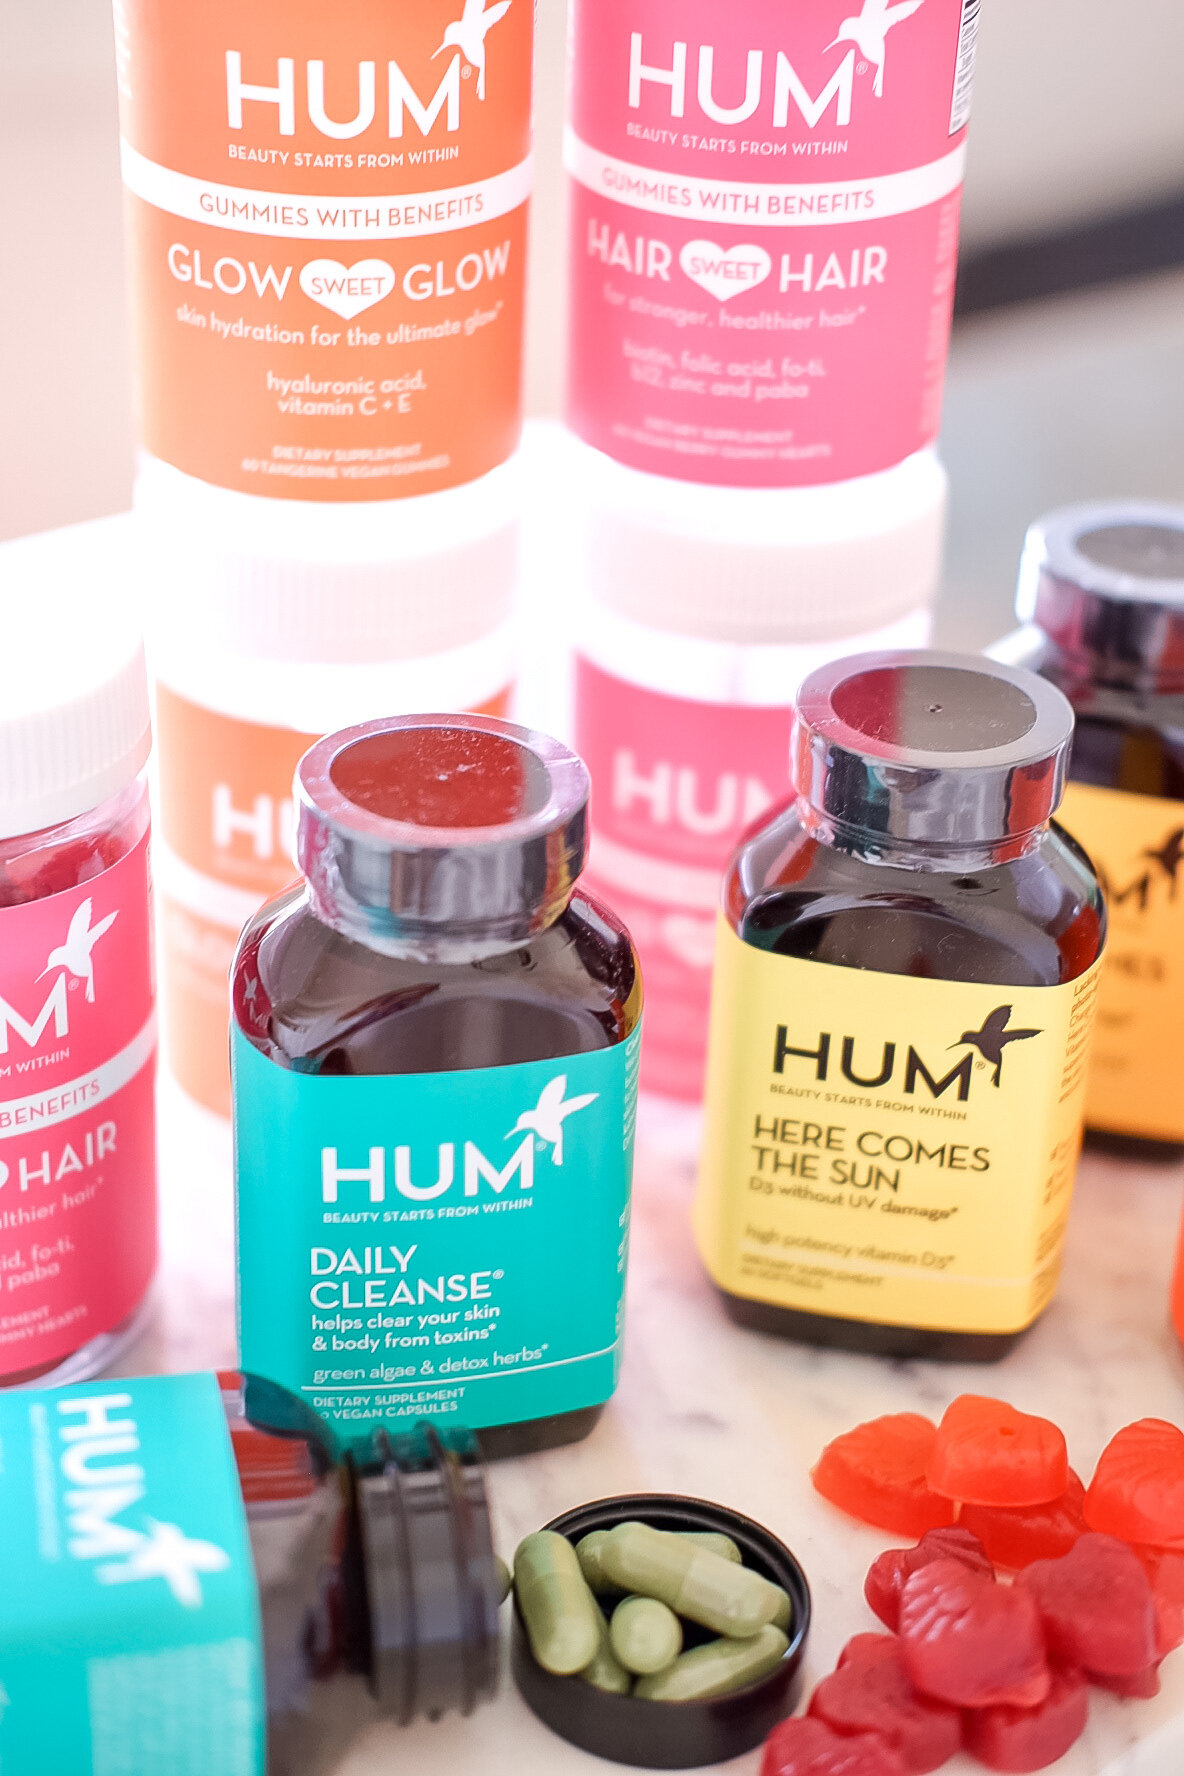 Hum Nutrition Review - Hair, Skin & Cleanse vitamins and supplements